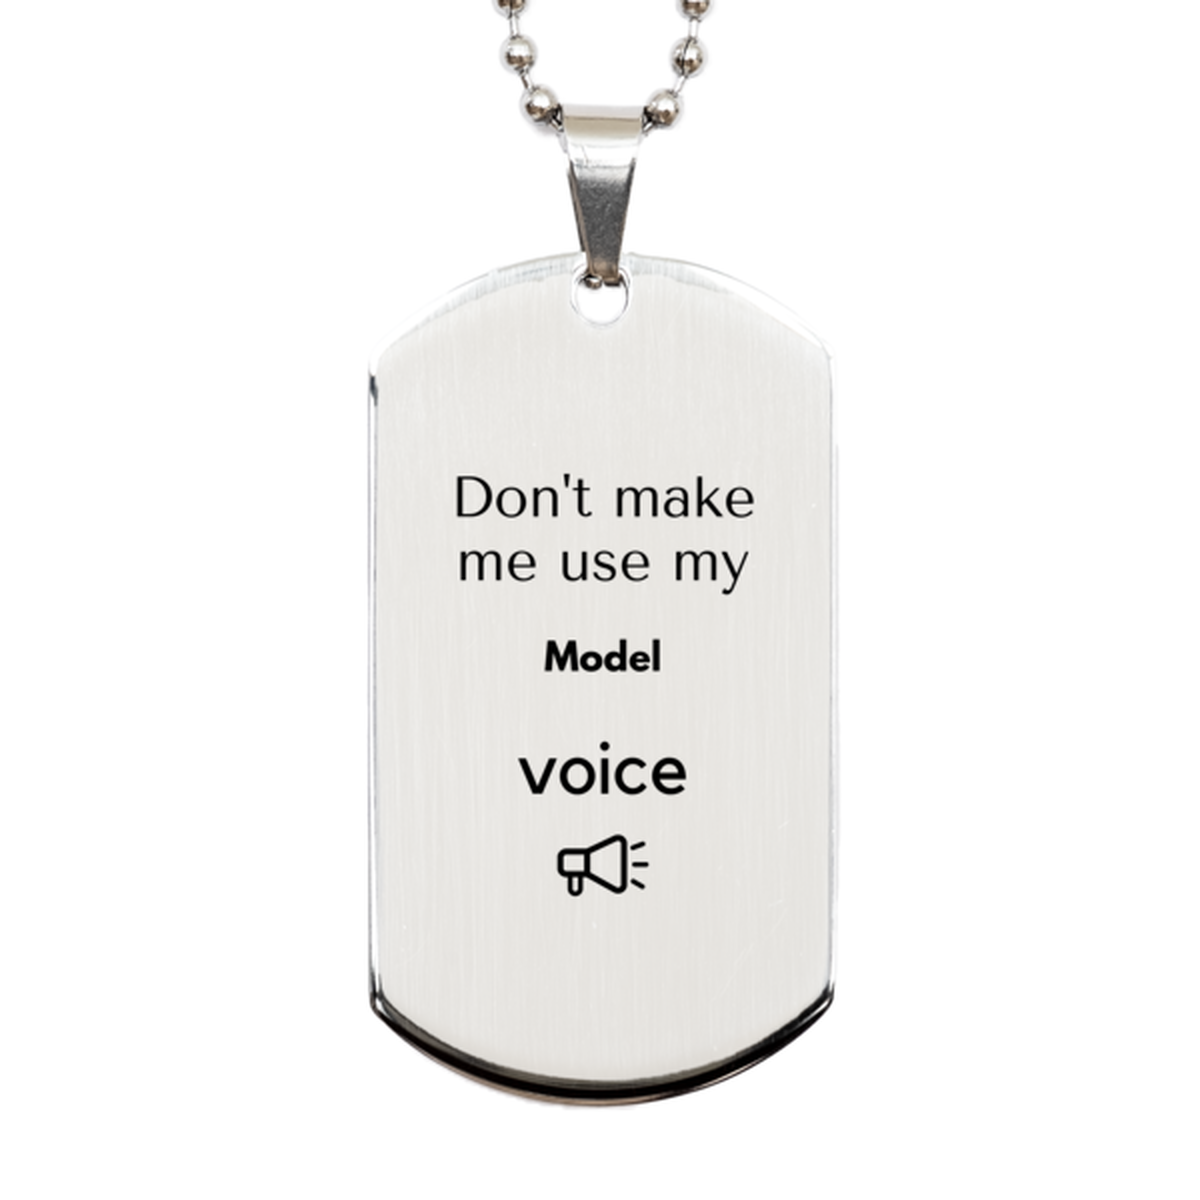 Don't make me use my Model voice, Sarcasm Model Gifts, Christmas Model Silver Dog Tag Birthday Unique Gifts For Model Coworkers, Men, Women, Colleague, Friends